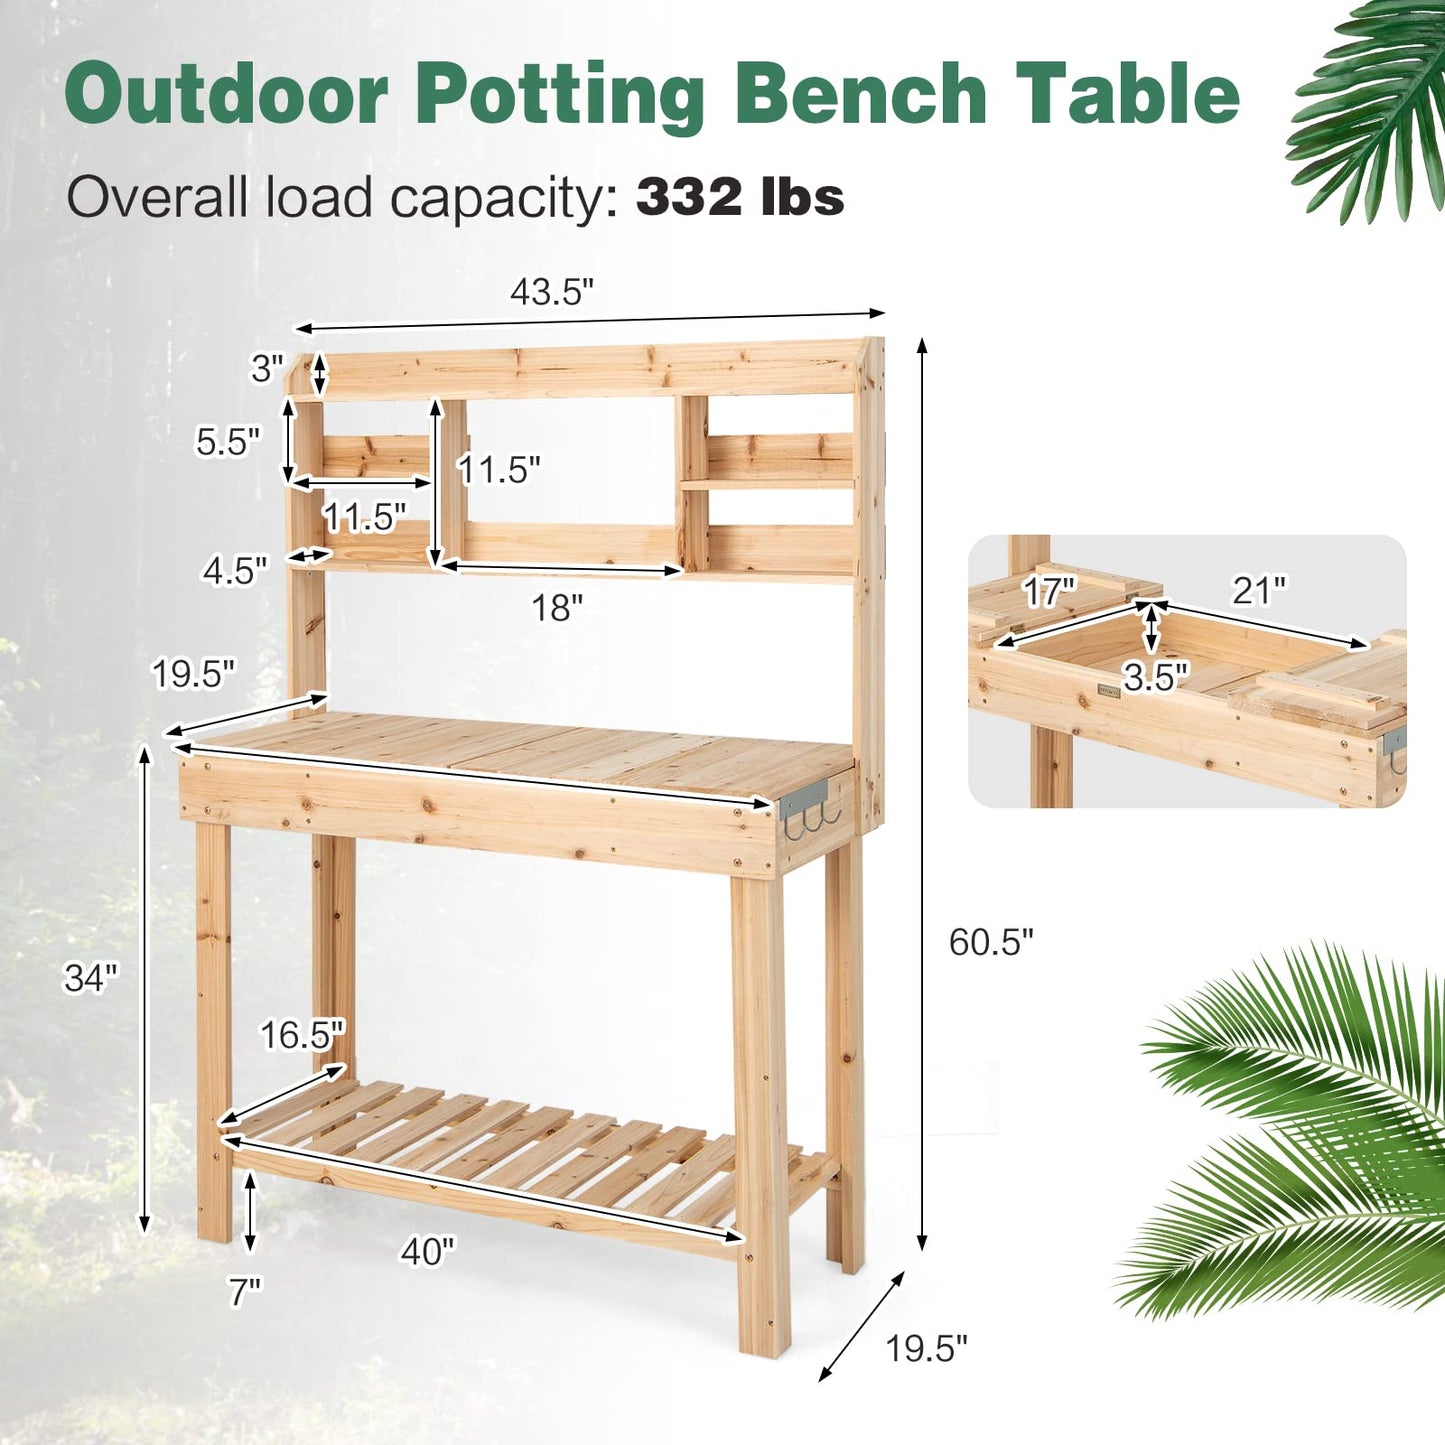 HAPPYGRILL Potting Bench Table, 60.5” Wood Workstation Workbench Table with Flip-Up Tabletop, Shelves & Hanging Hooks, Outdoor Flowerpot Bench,